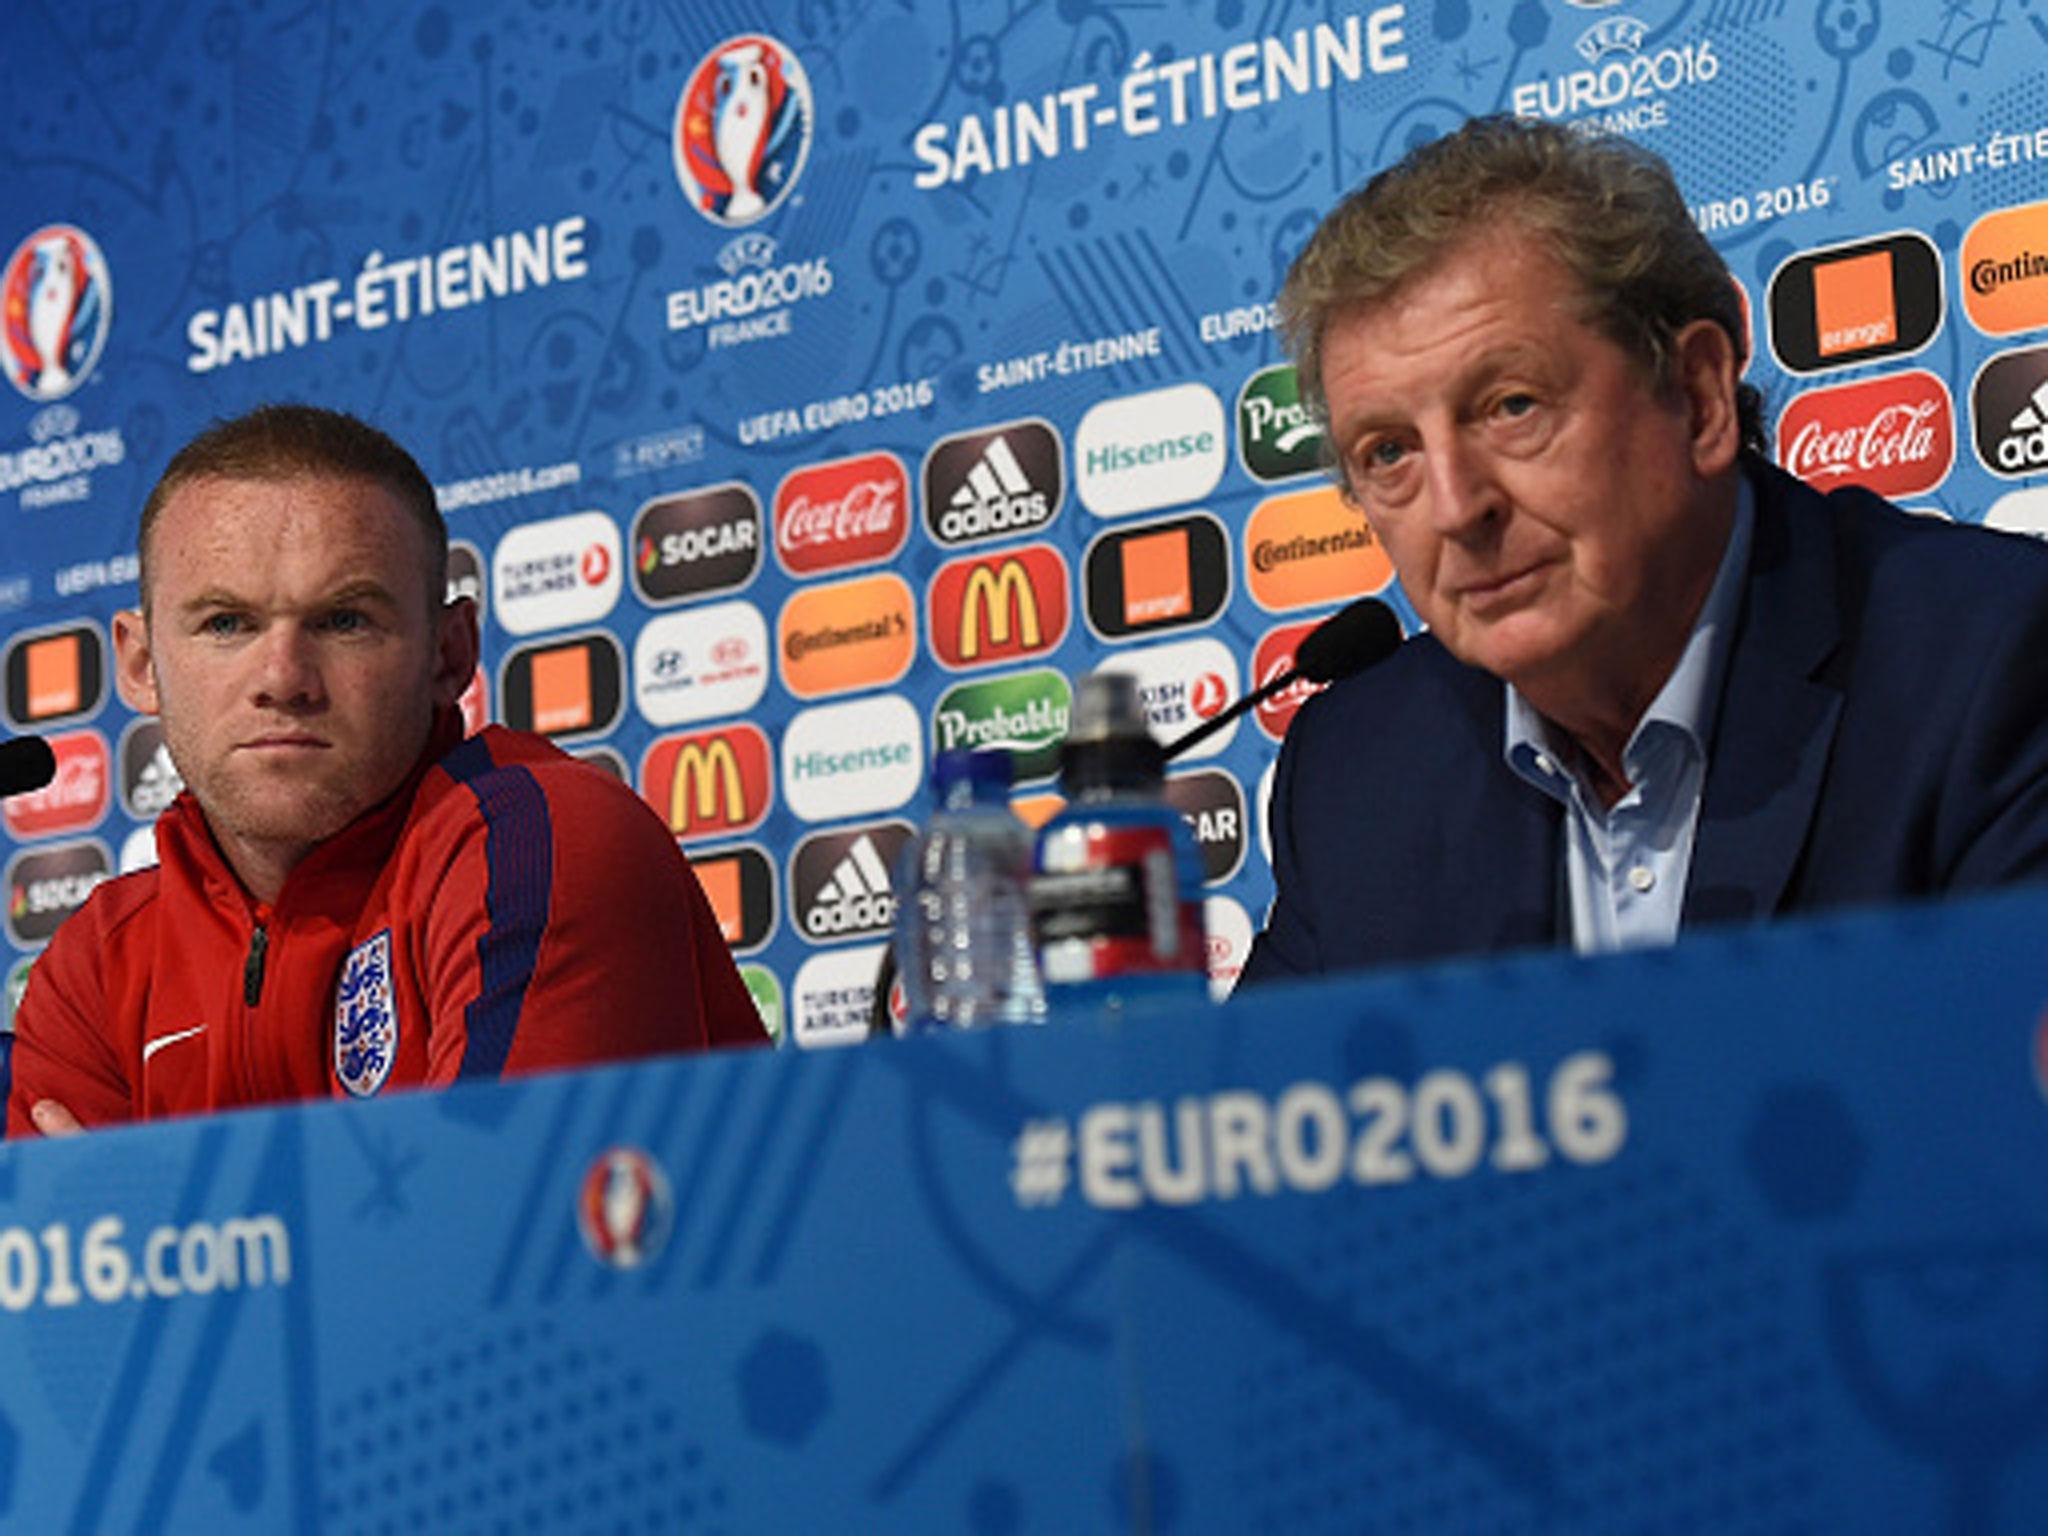 Wayne Rooney said the players are fully behind coach Roy Hodgson and want him to continue in the role (Getty)